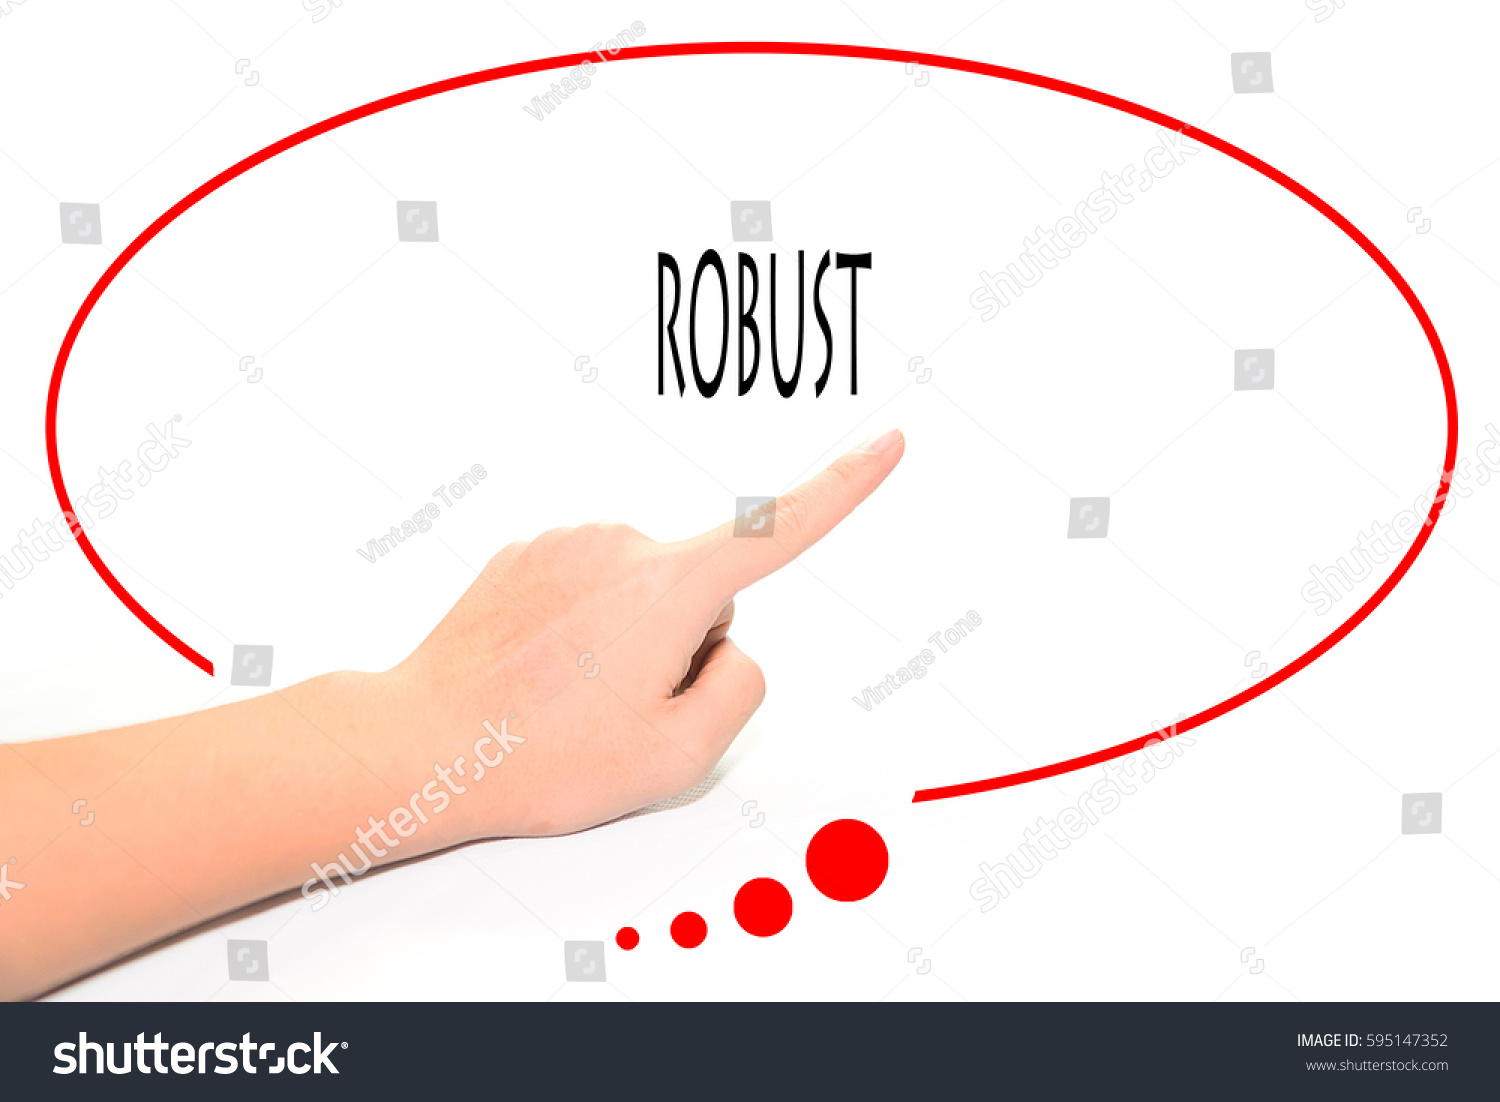 Robust Hand Writing Word Represent Meaning Stock Photo Edit Now